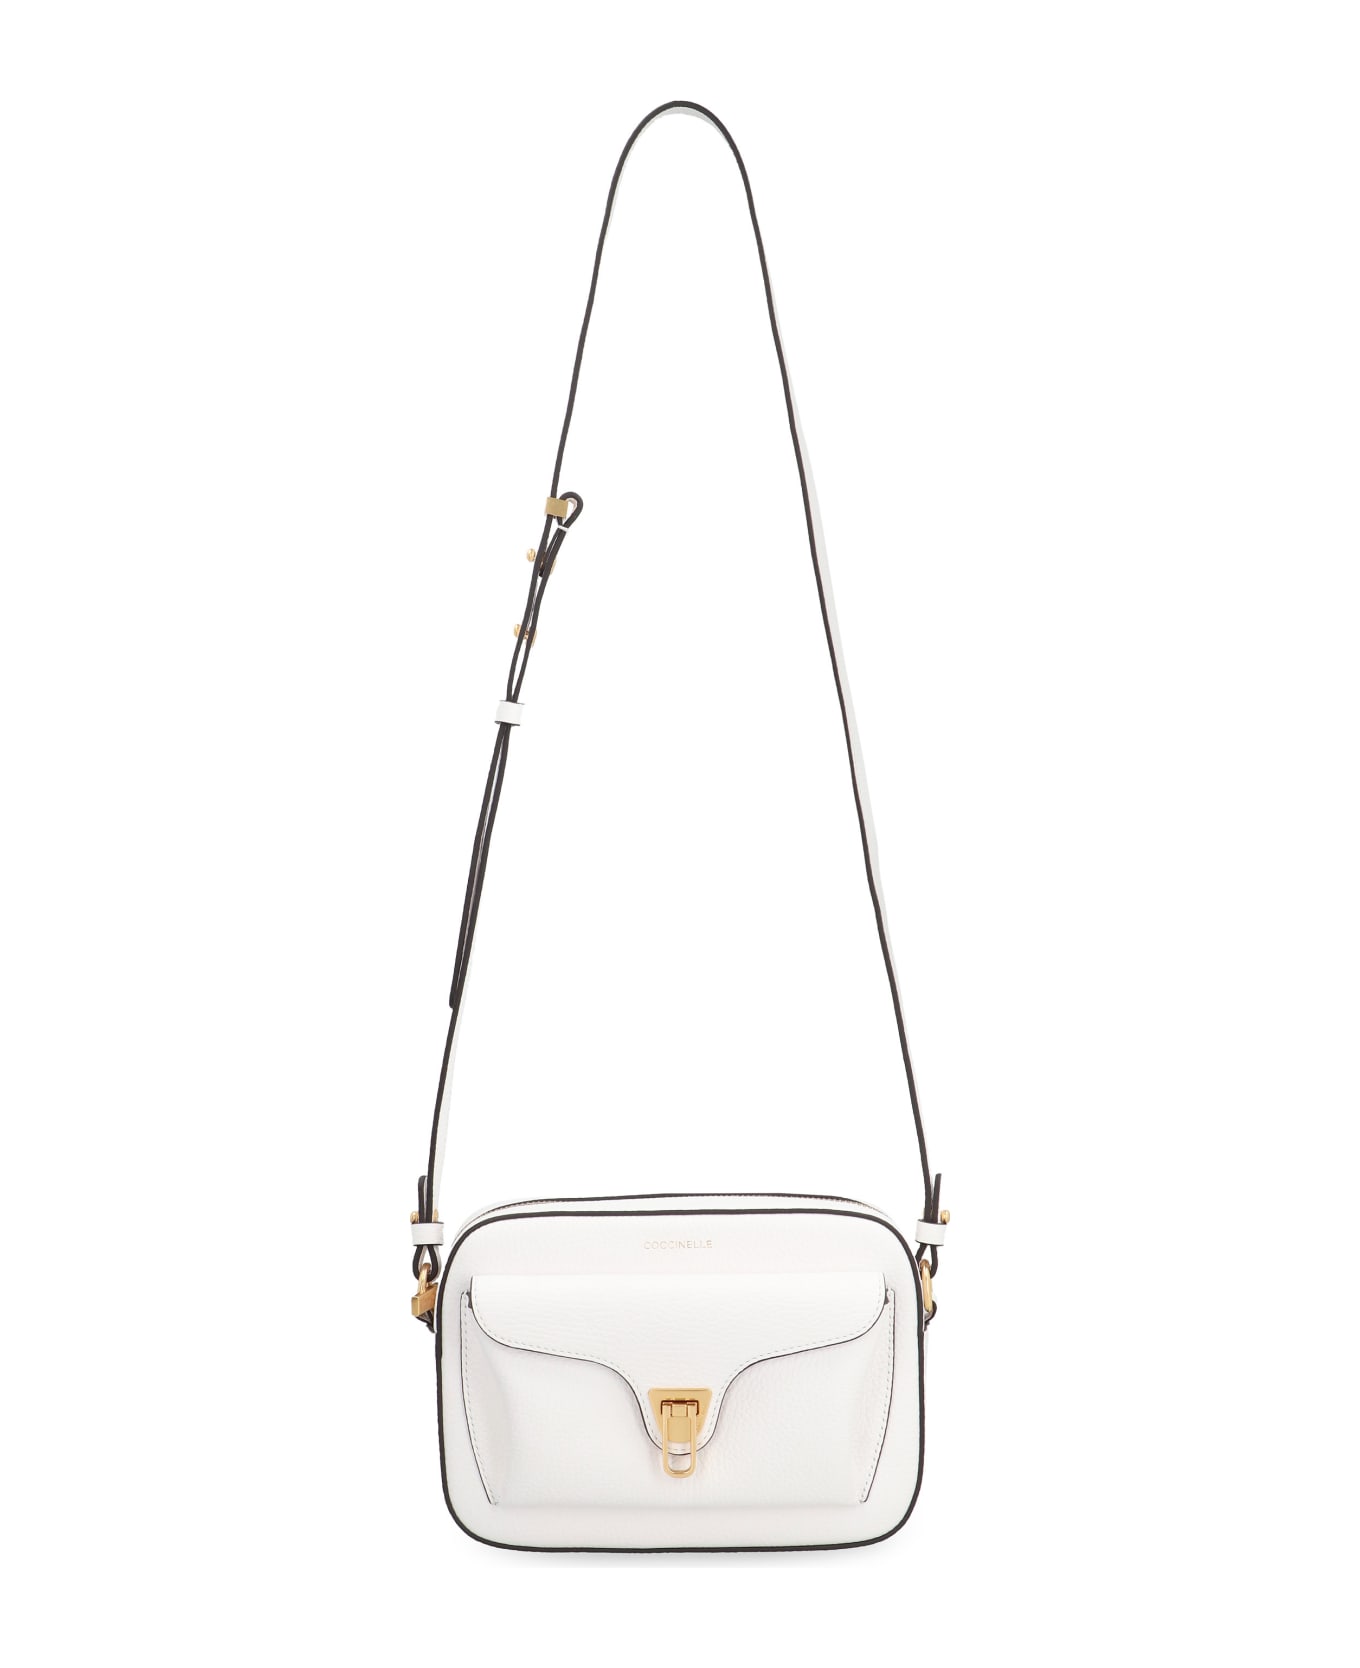 Coccinelle Beat Soft Leather Crossbody Bag - White